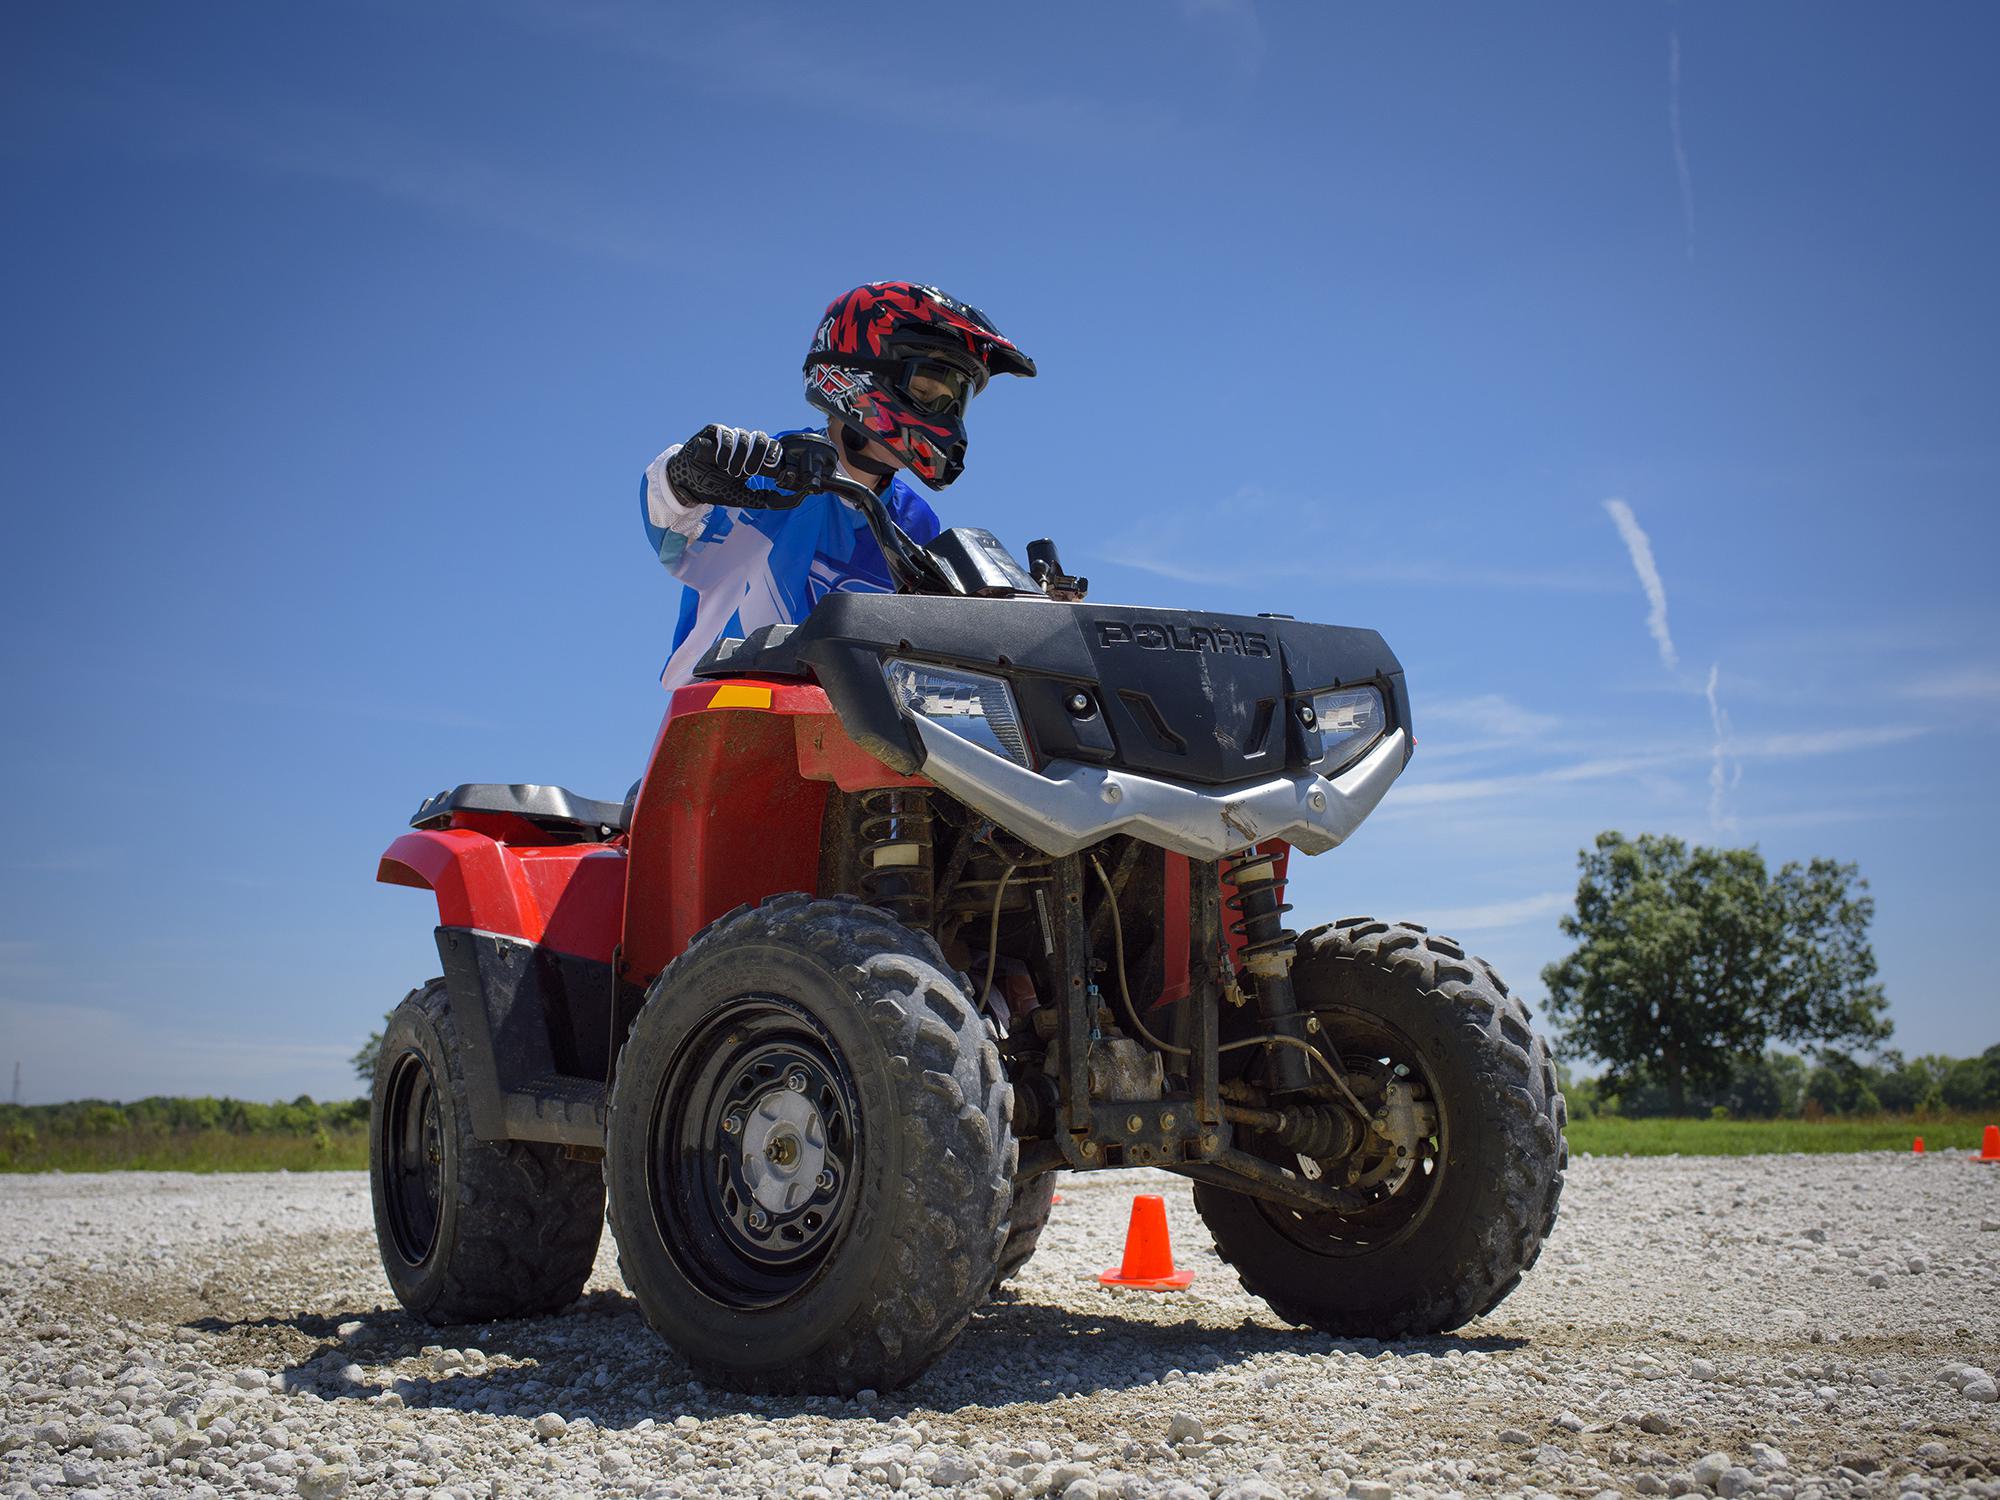 A young rider in full safety gear navigates a turn on an all-terrain vehicle.